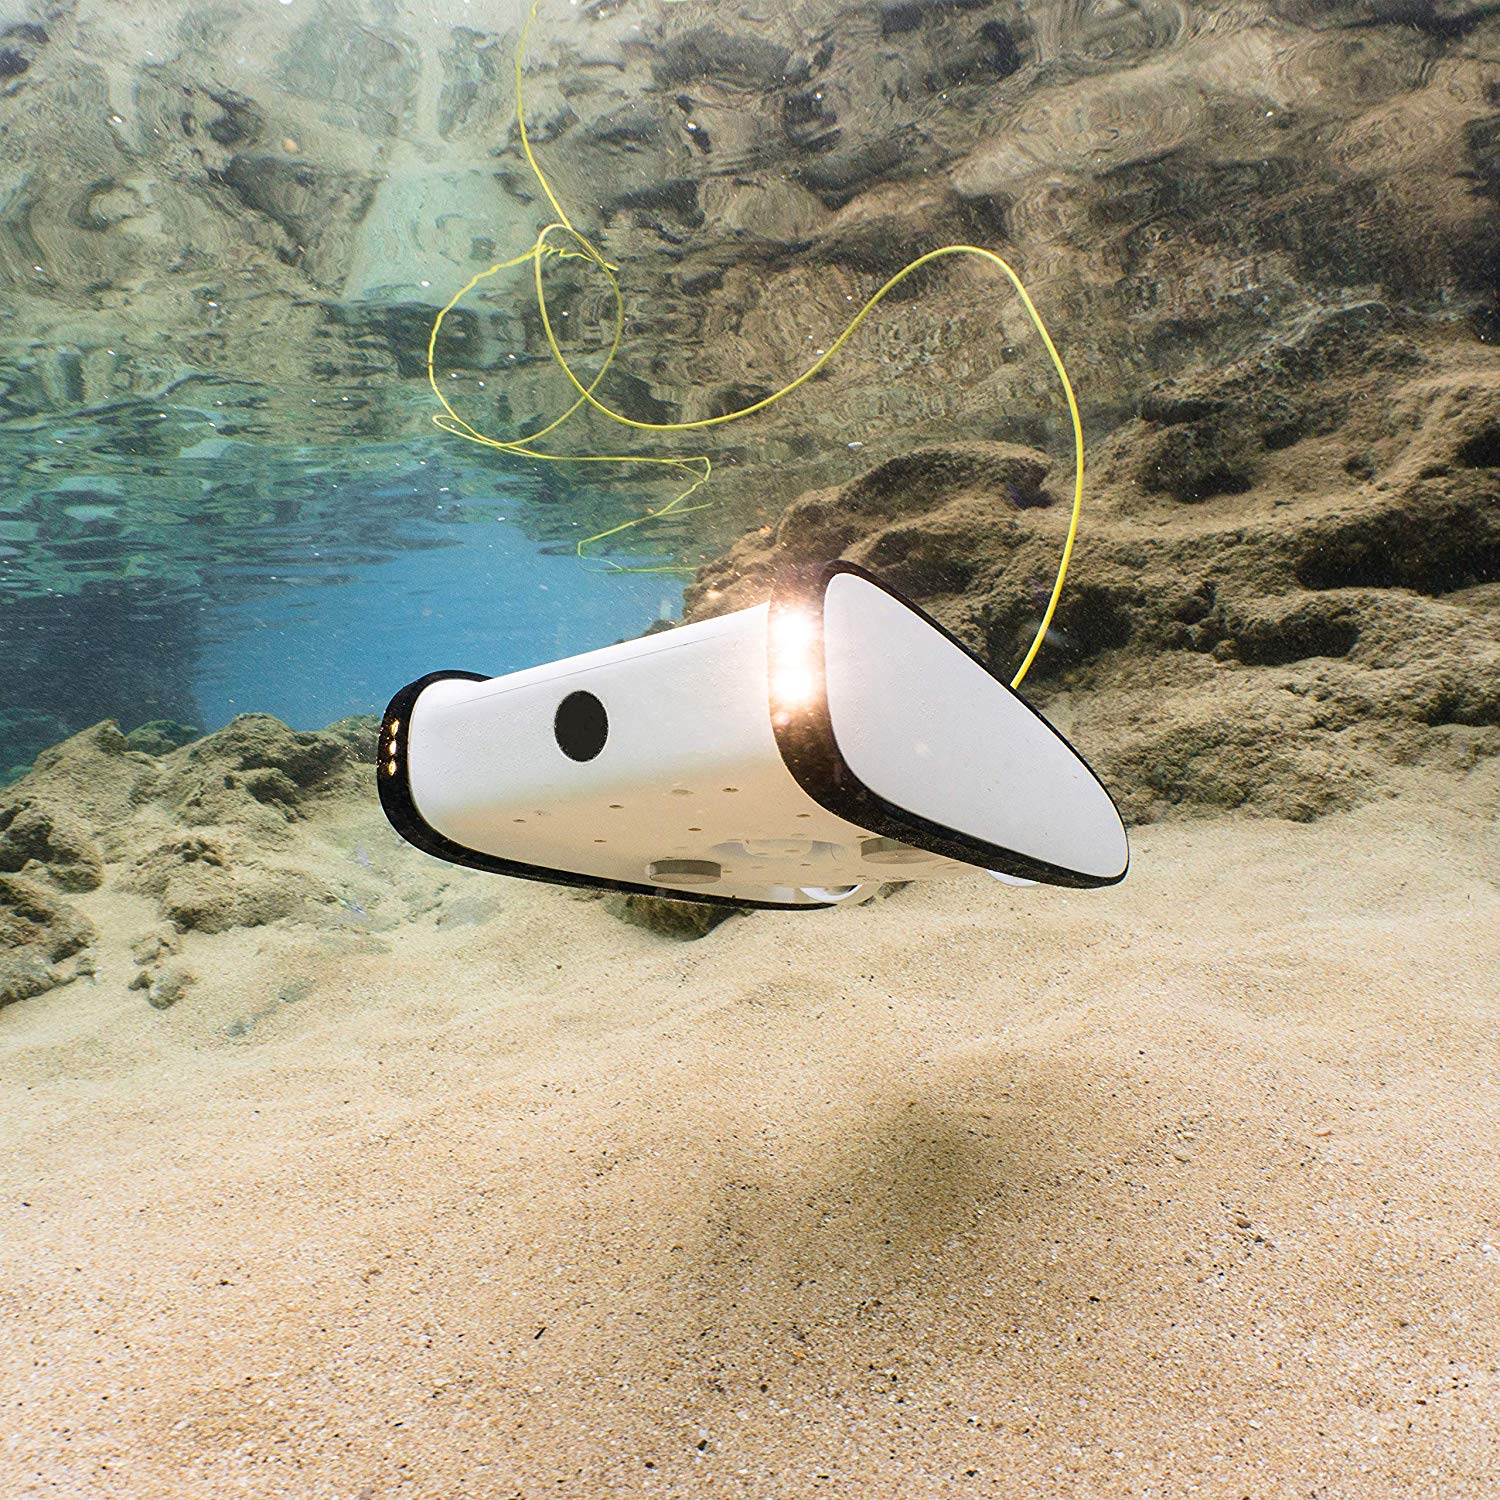 Our Selection of the Best Underwater Drones for 2019